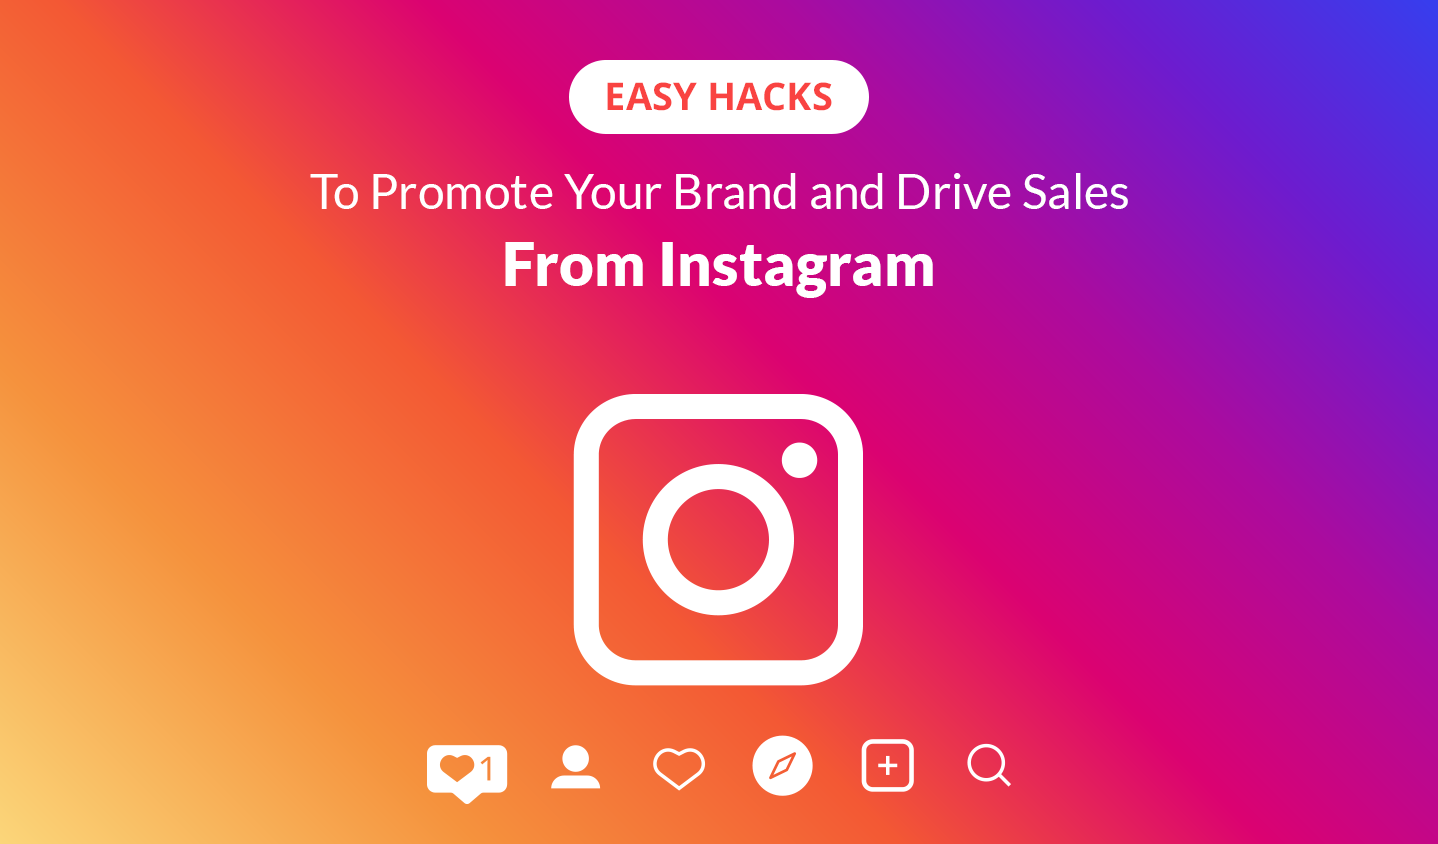 4 Easy Hacks to Promote Your Brand and Drive Sales From Instagram